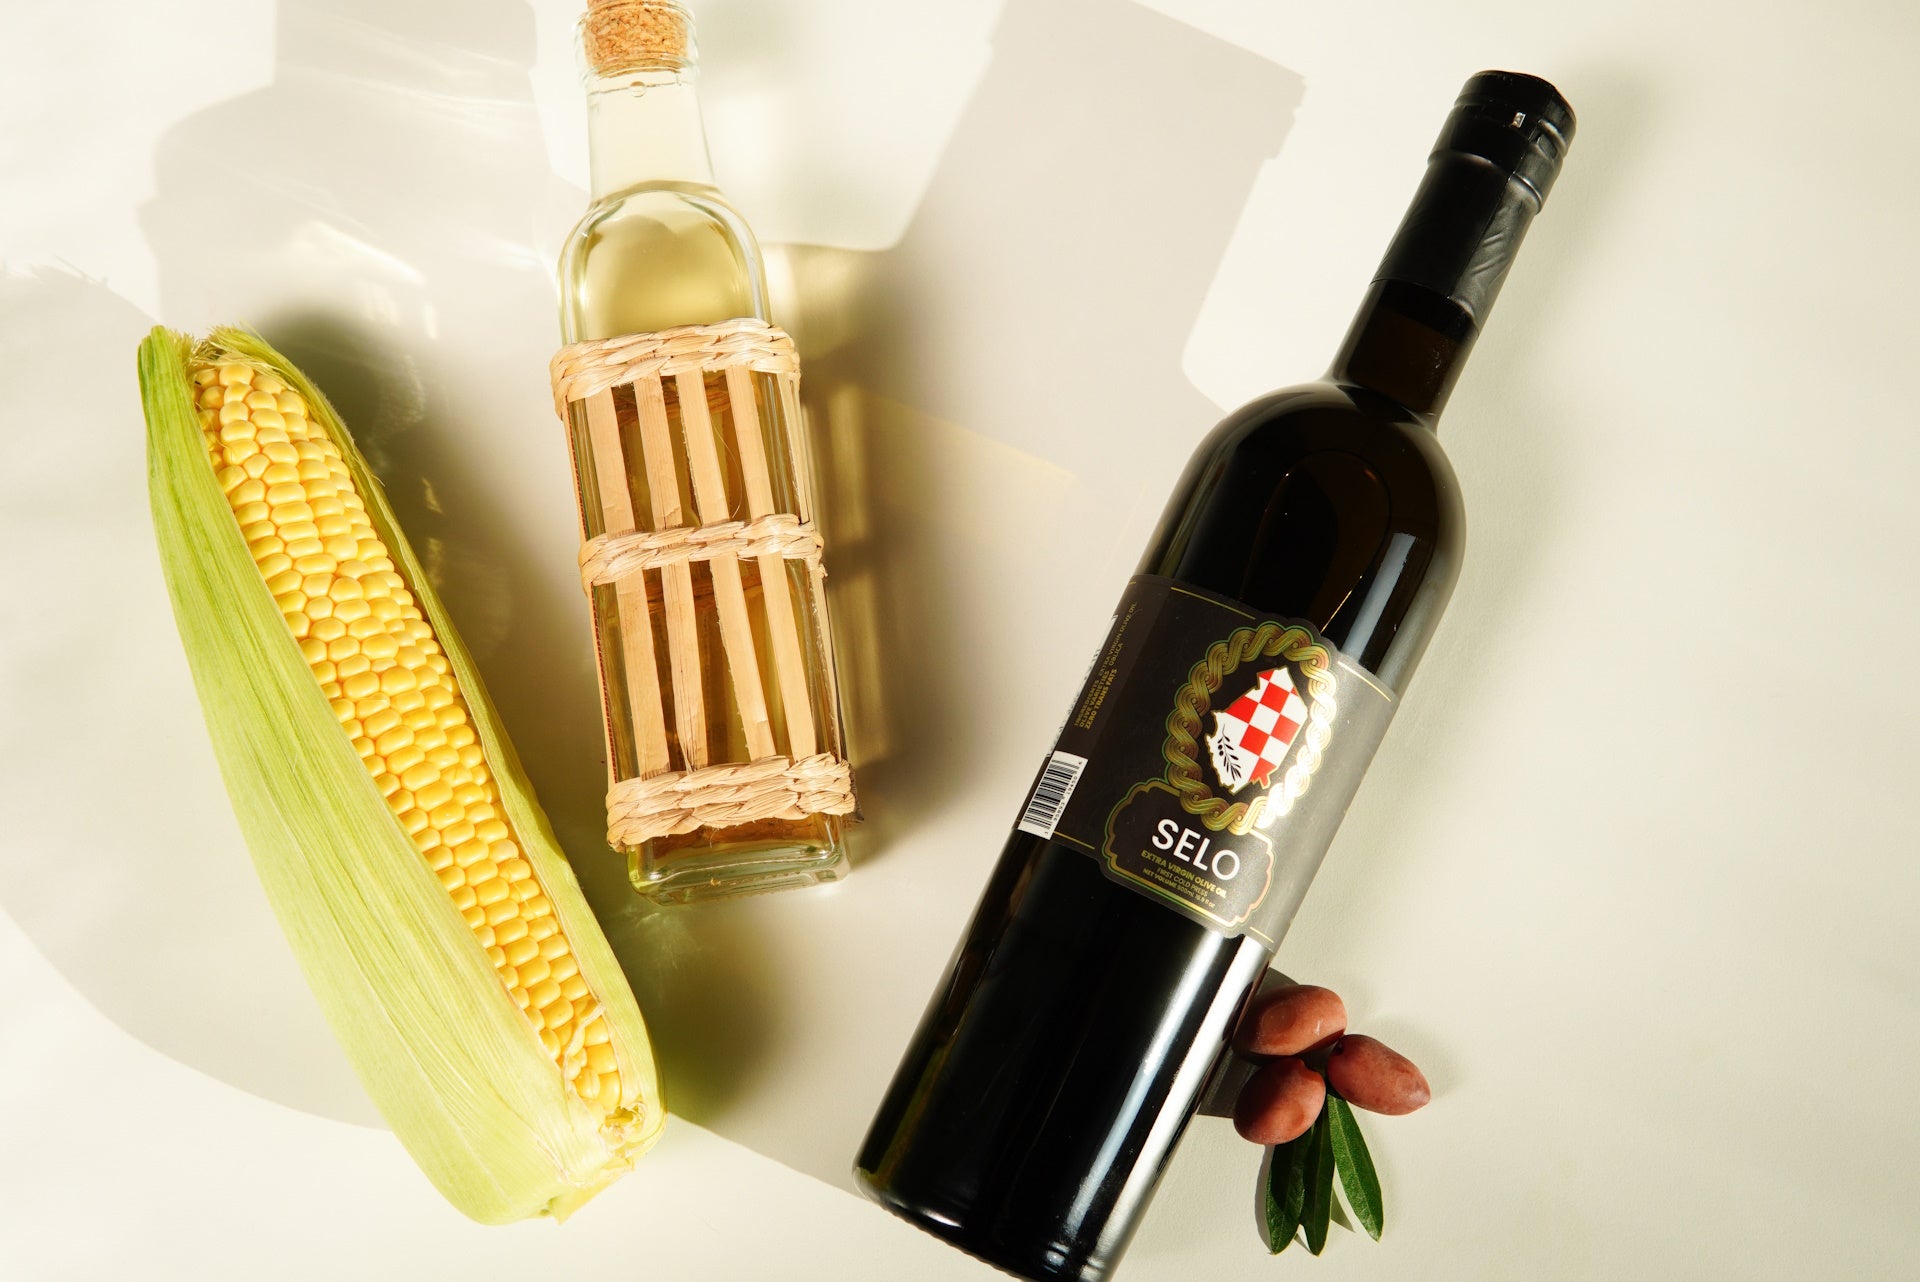 A single bottle of Selo olive oil next to a bottle of palm oil, highlighting the choice for healthier cooking.